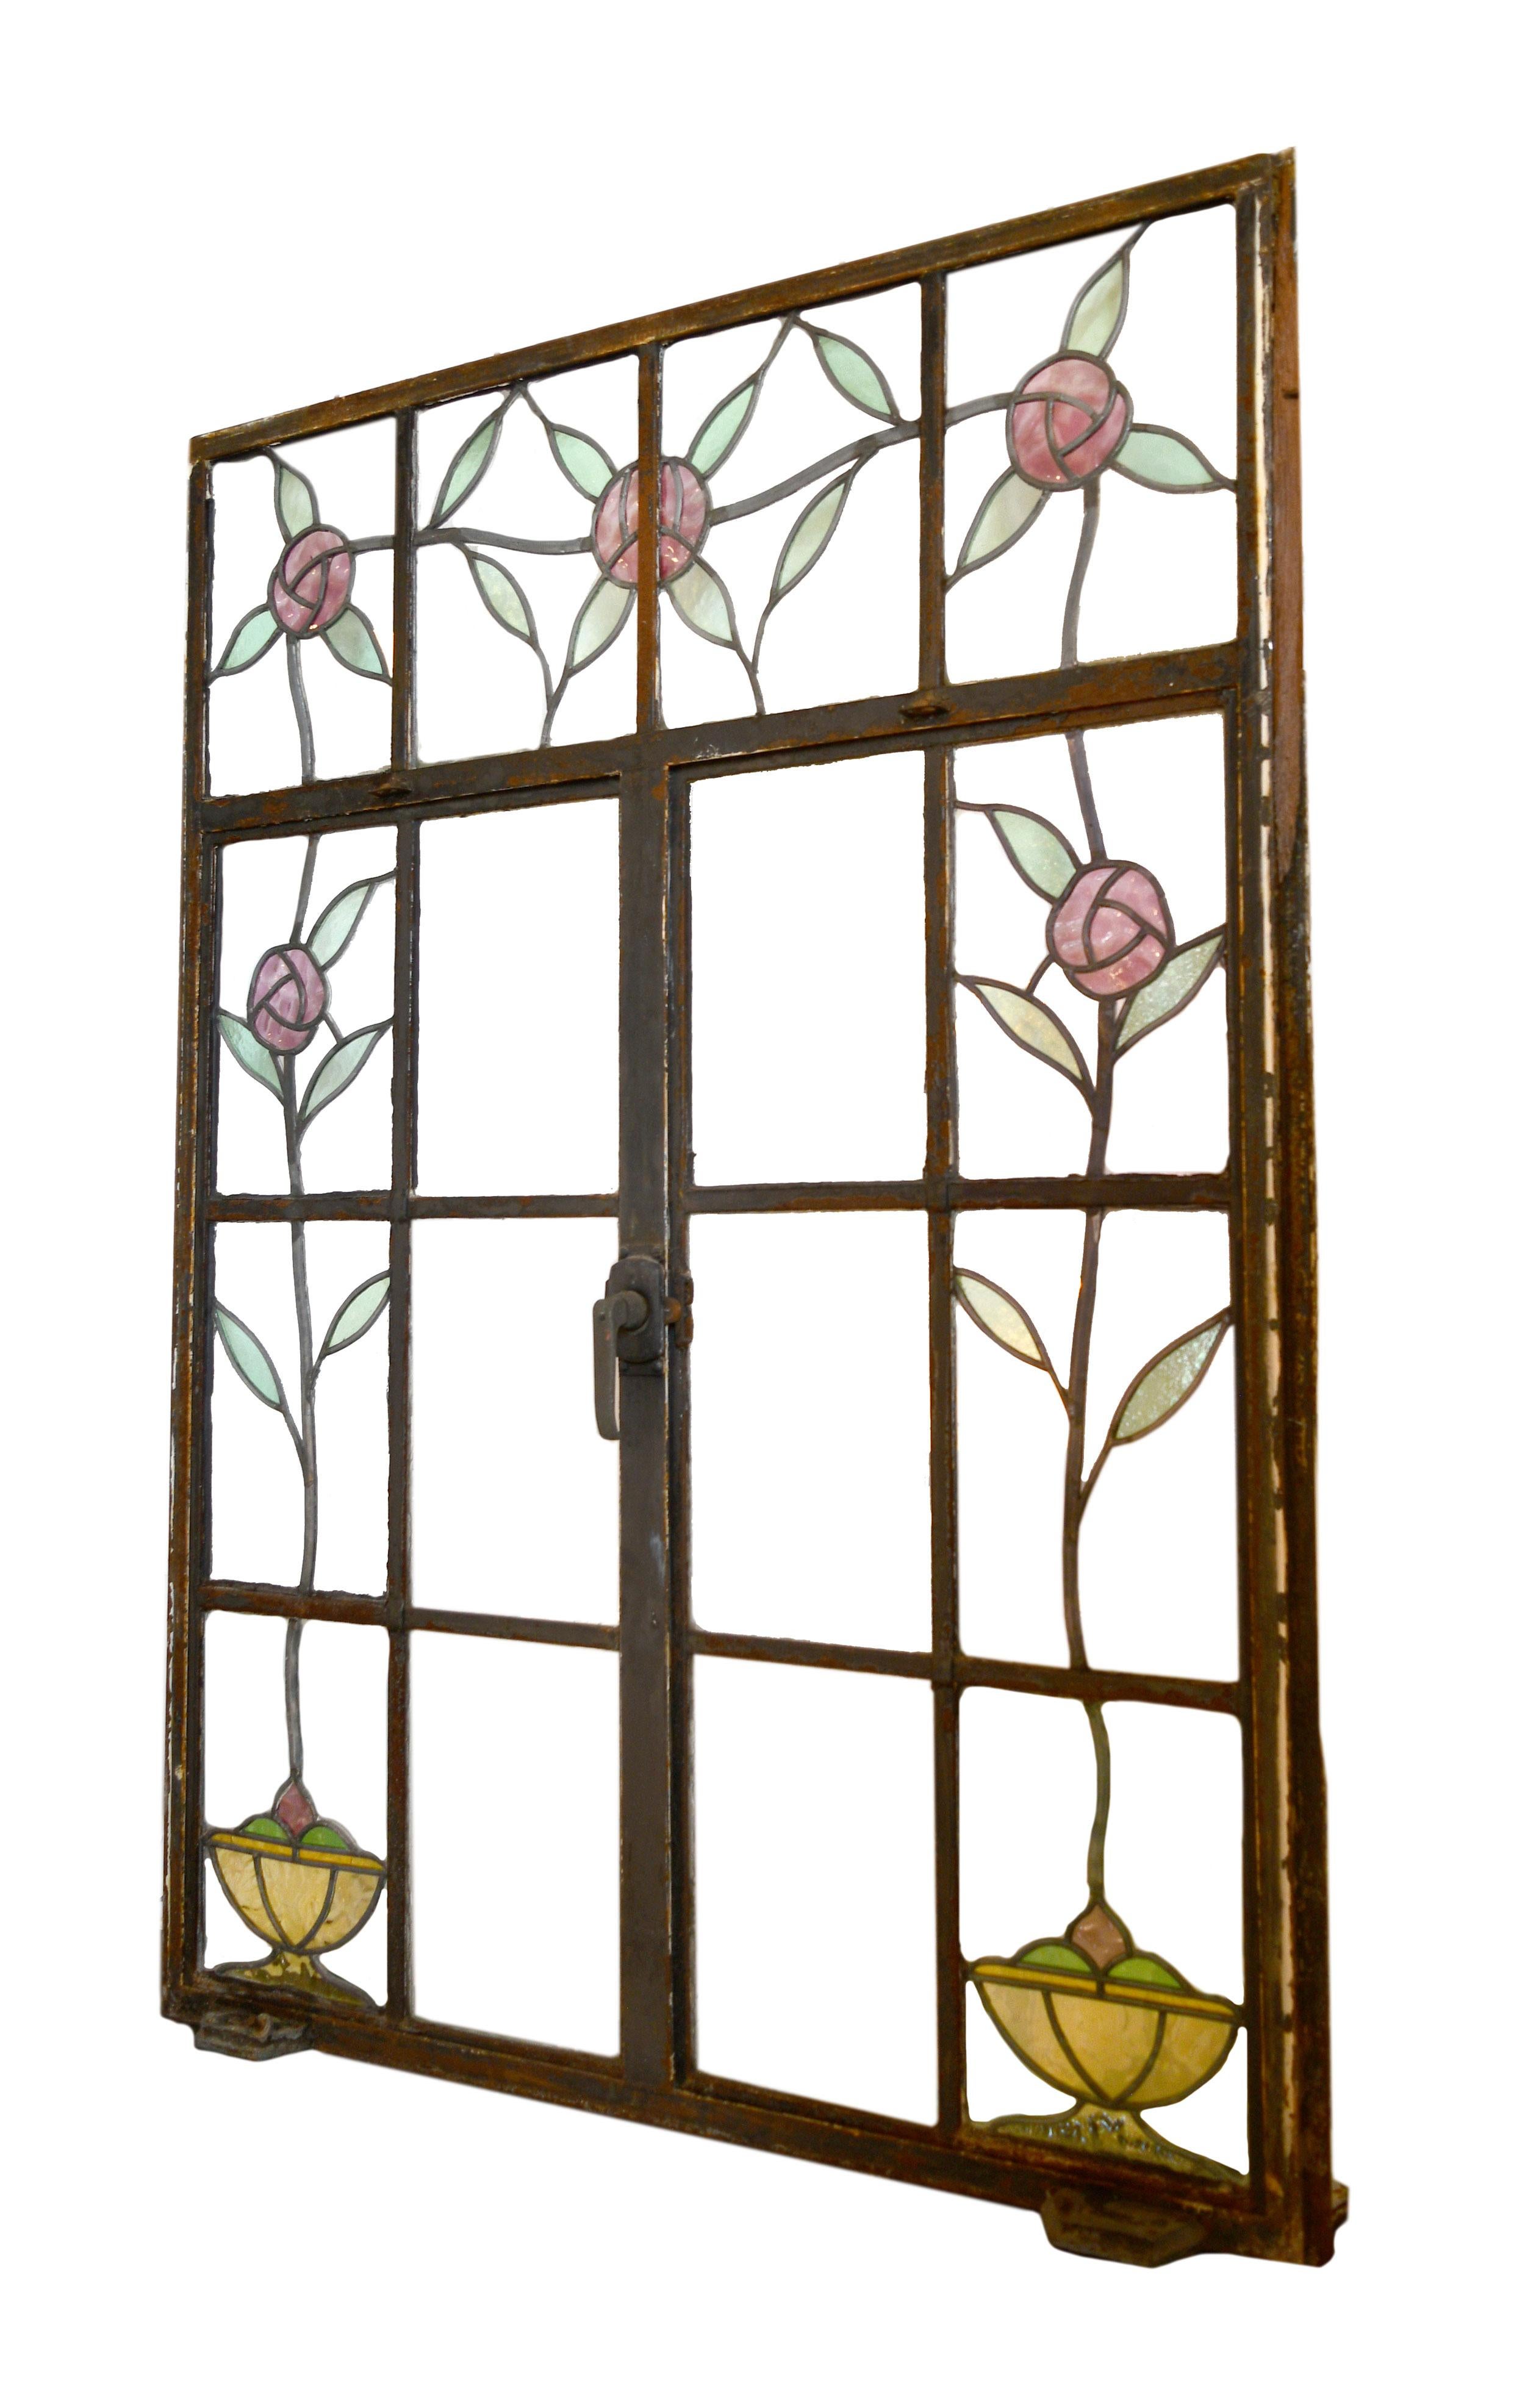 This stunning casement window features lovely stained glass roses winding throughout the frame. This window is in great condition with only one small crack within the glass.
          